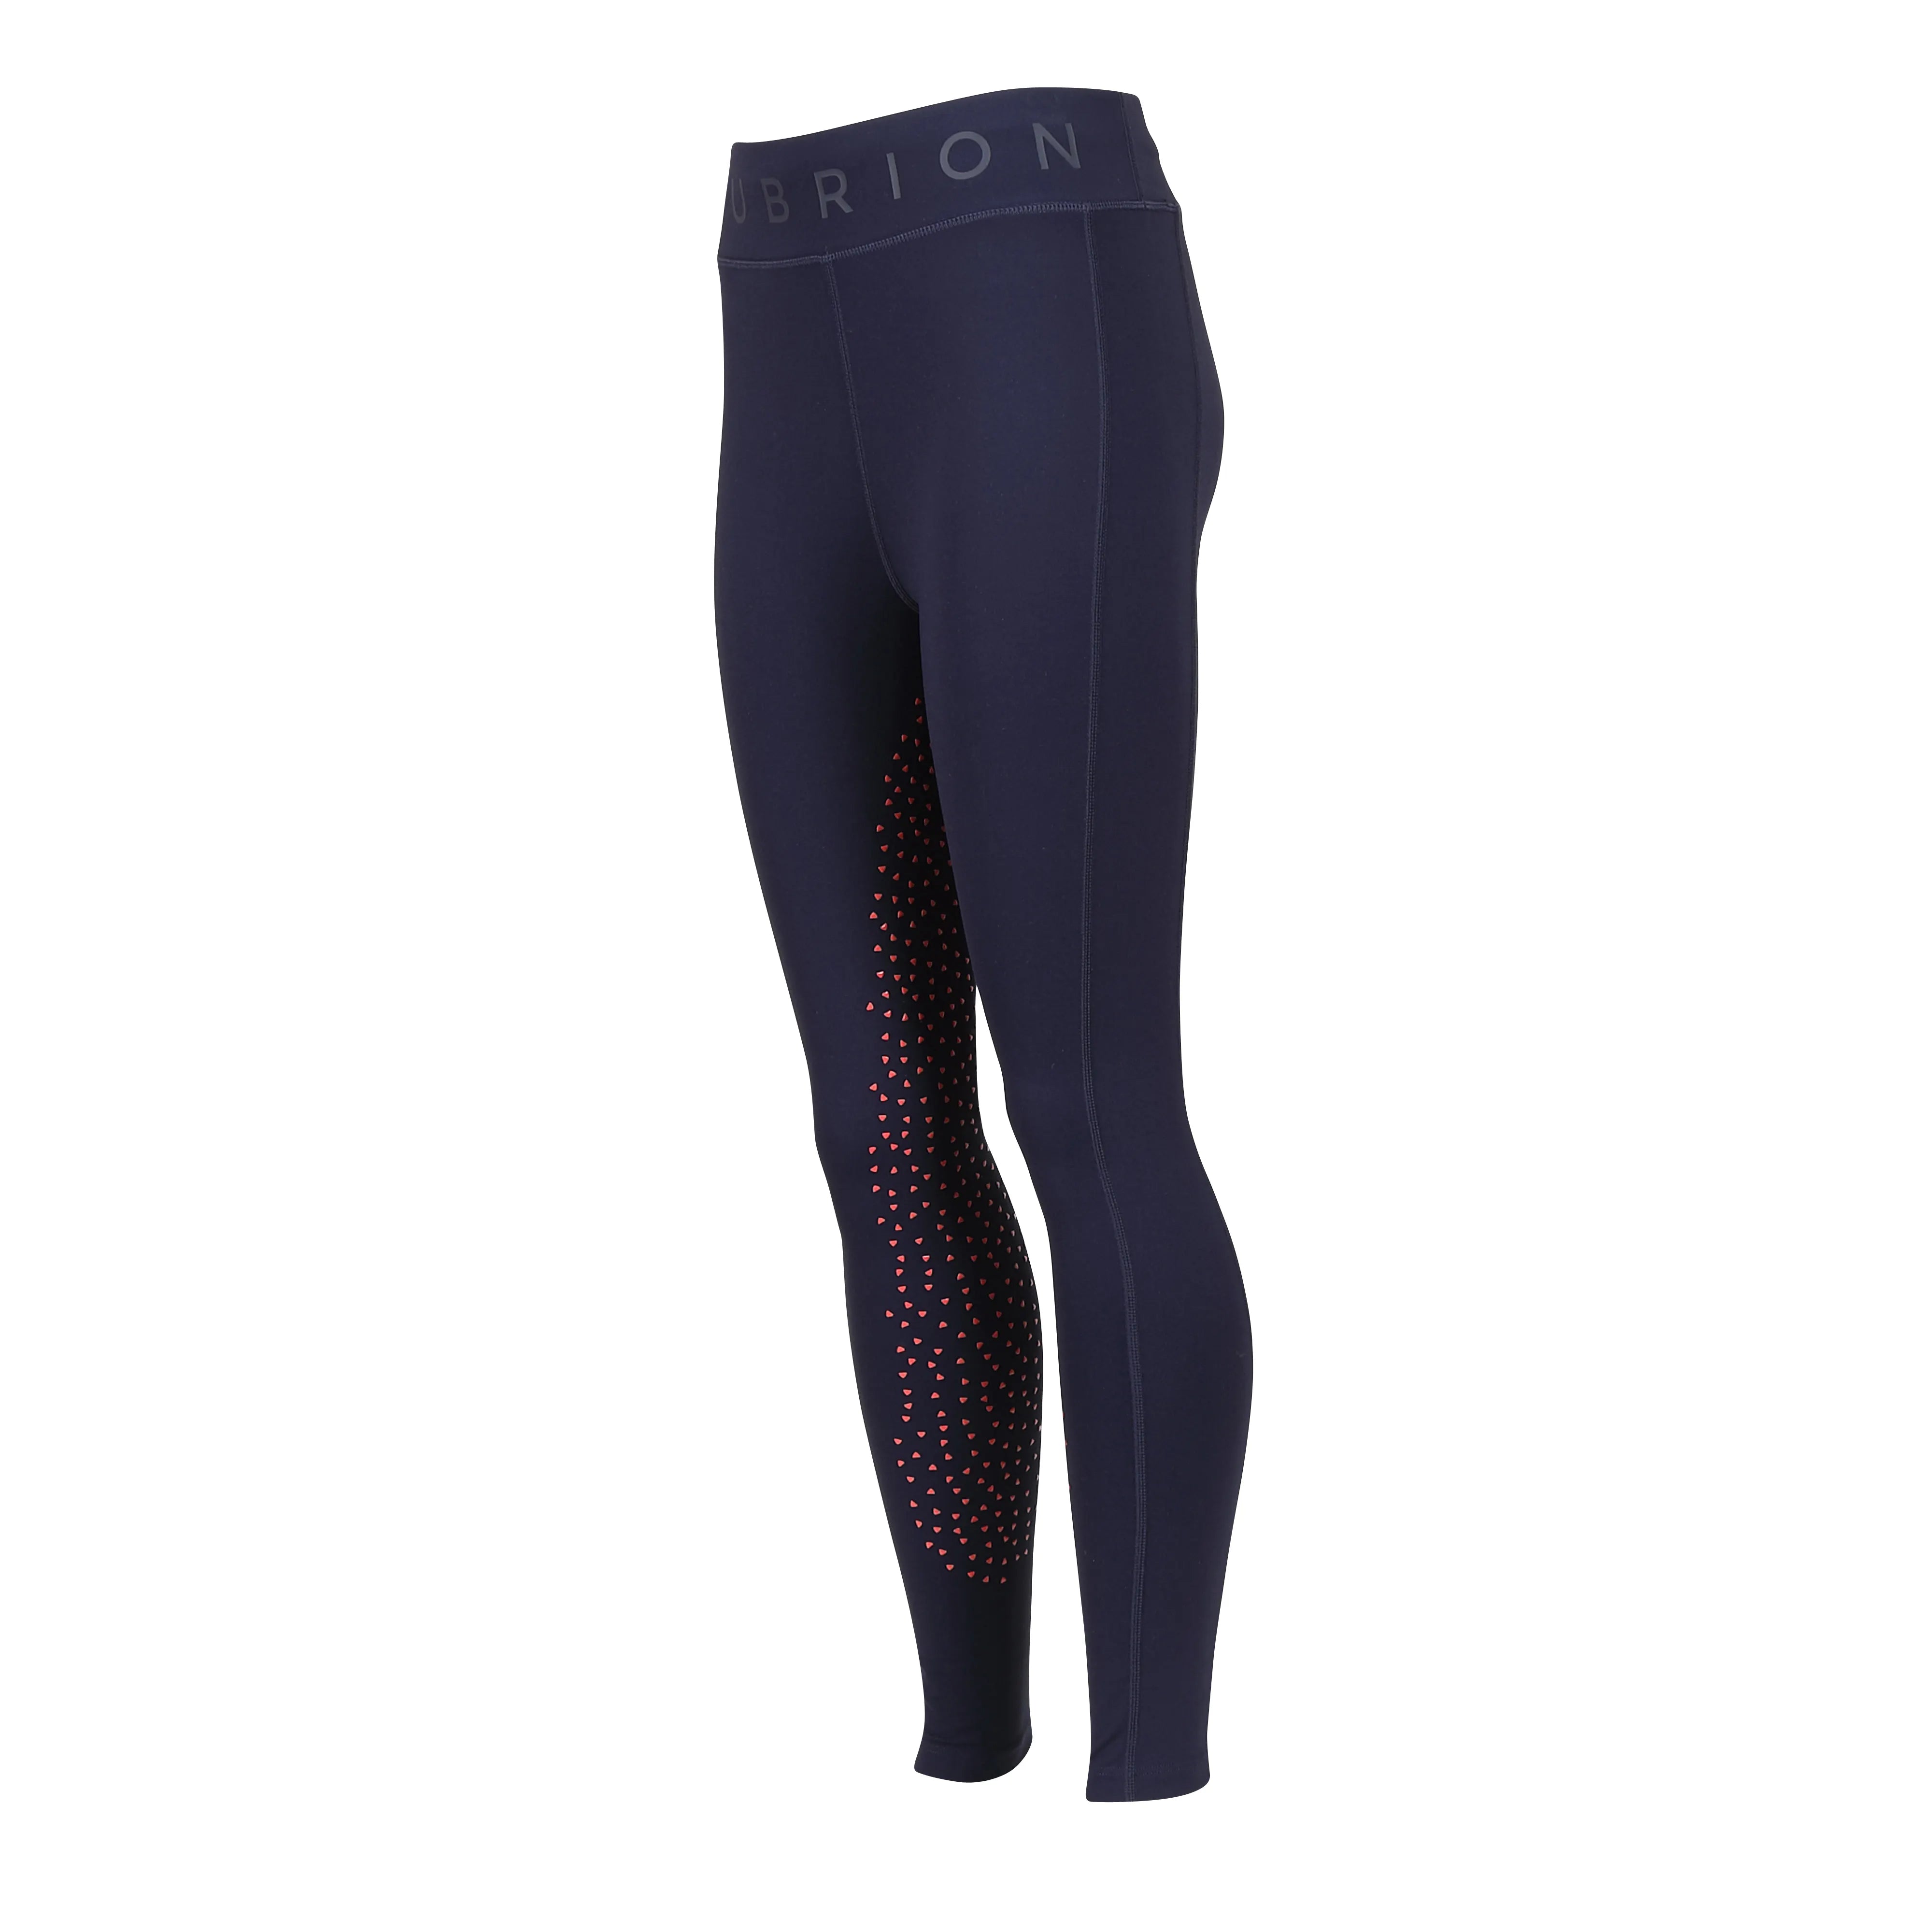 Aubrion Kids Non-Stop Riding Tights